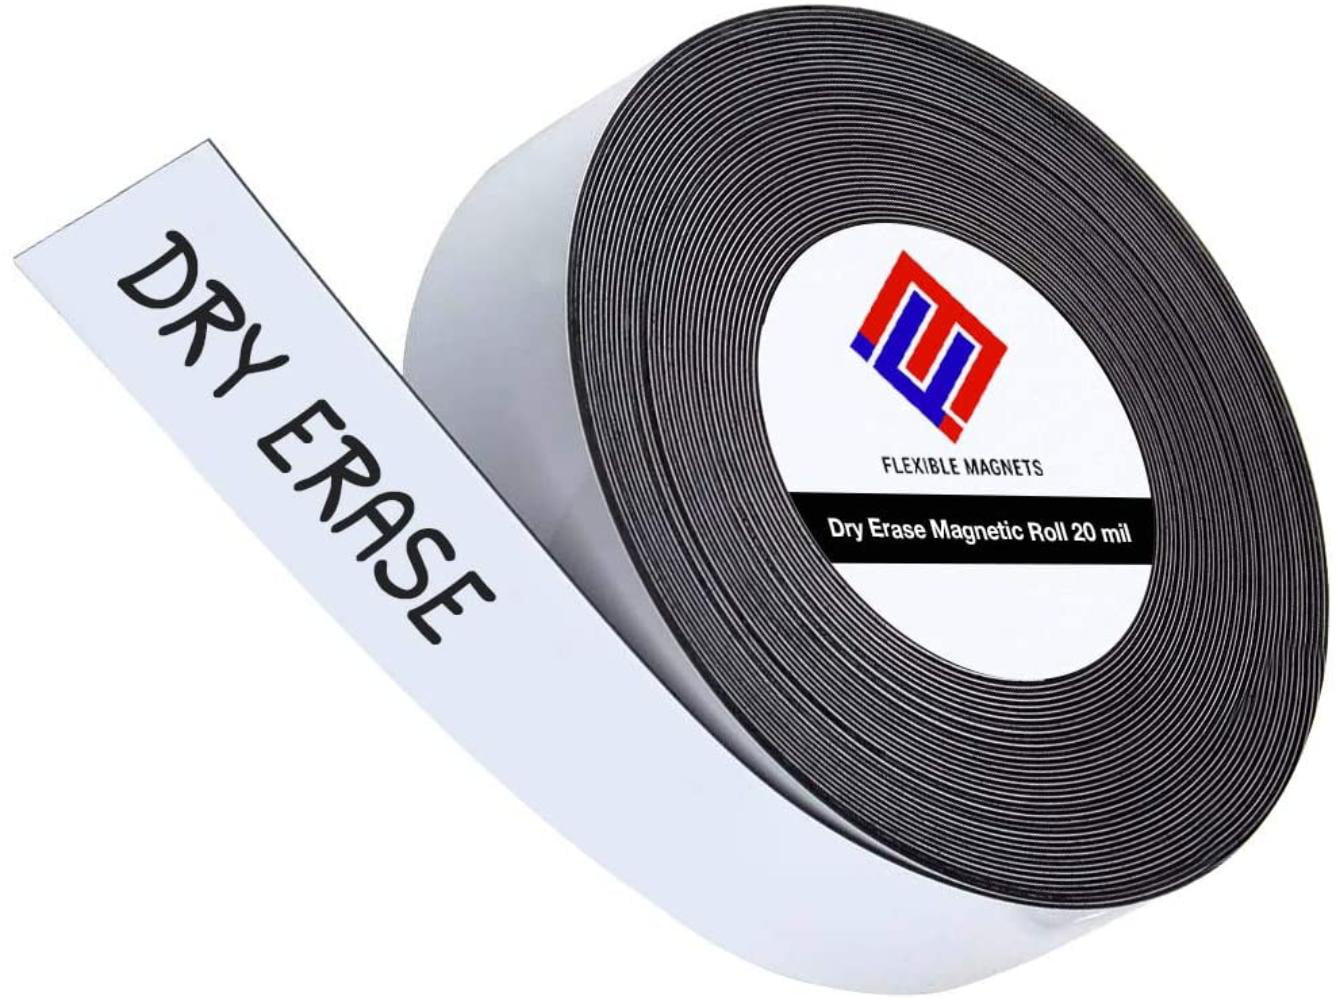 Free shipping! 10 Dry Erase Magnetic Shelf Label Magnets 1" x 5" White 